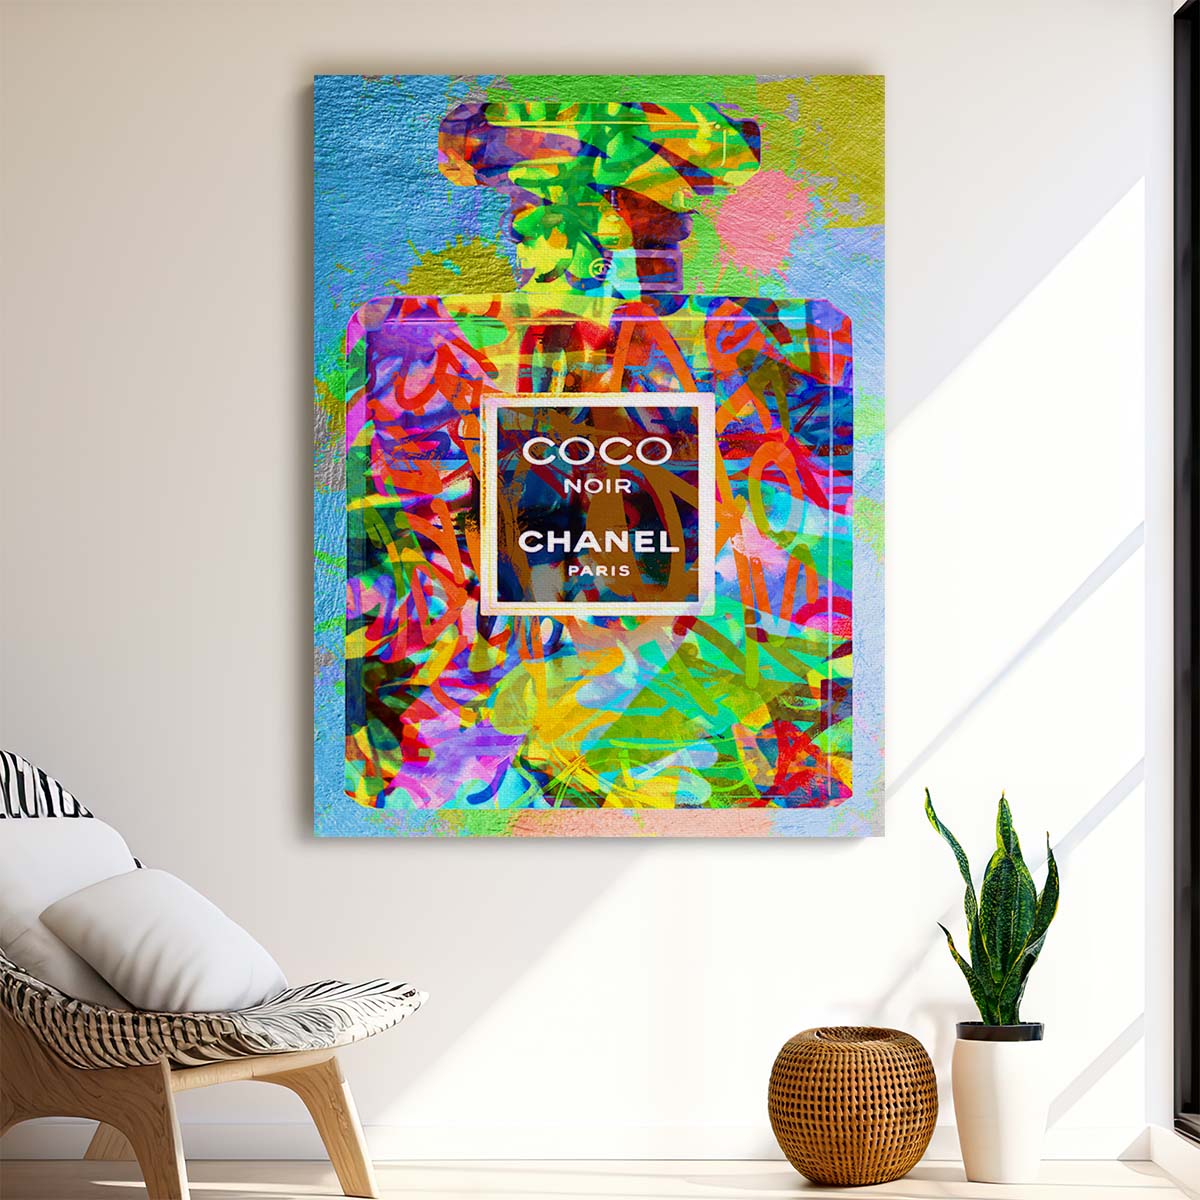 Coco Chanel Noir Perfume Graffiti Neon Wall Art by Luxuriance Designs. Made in USA.